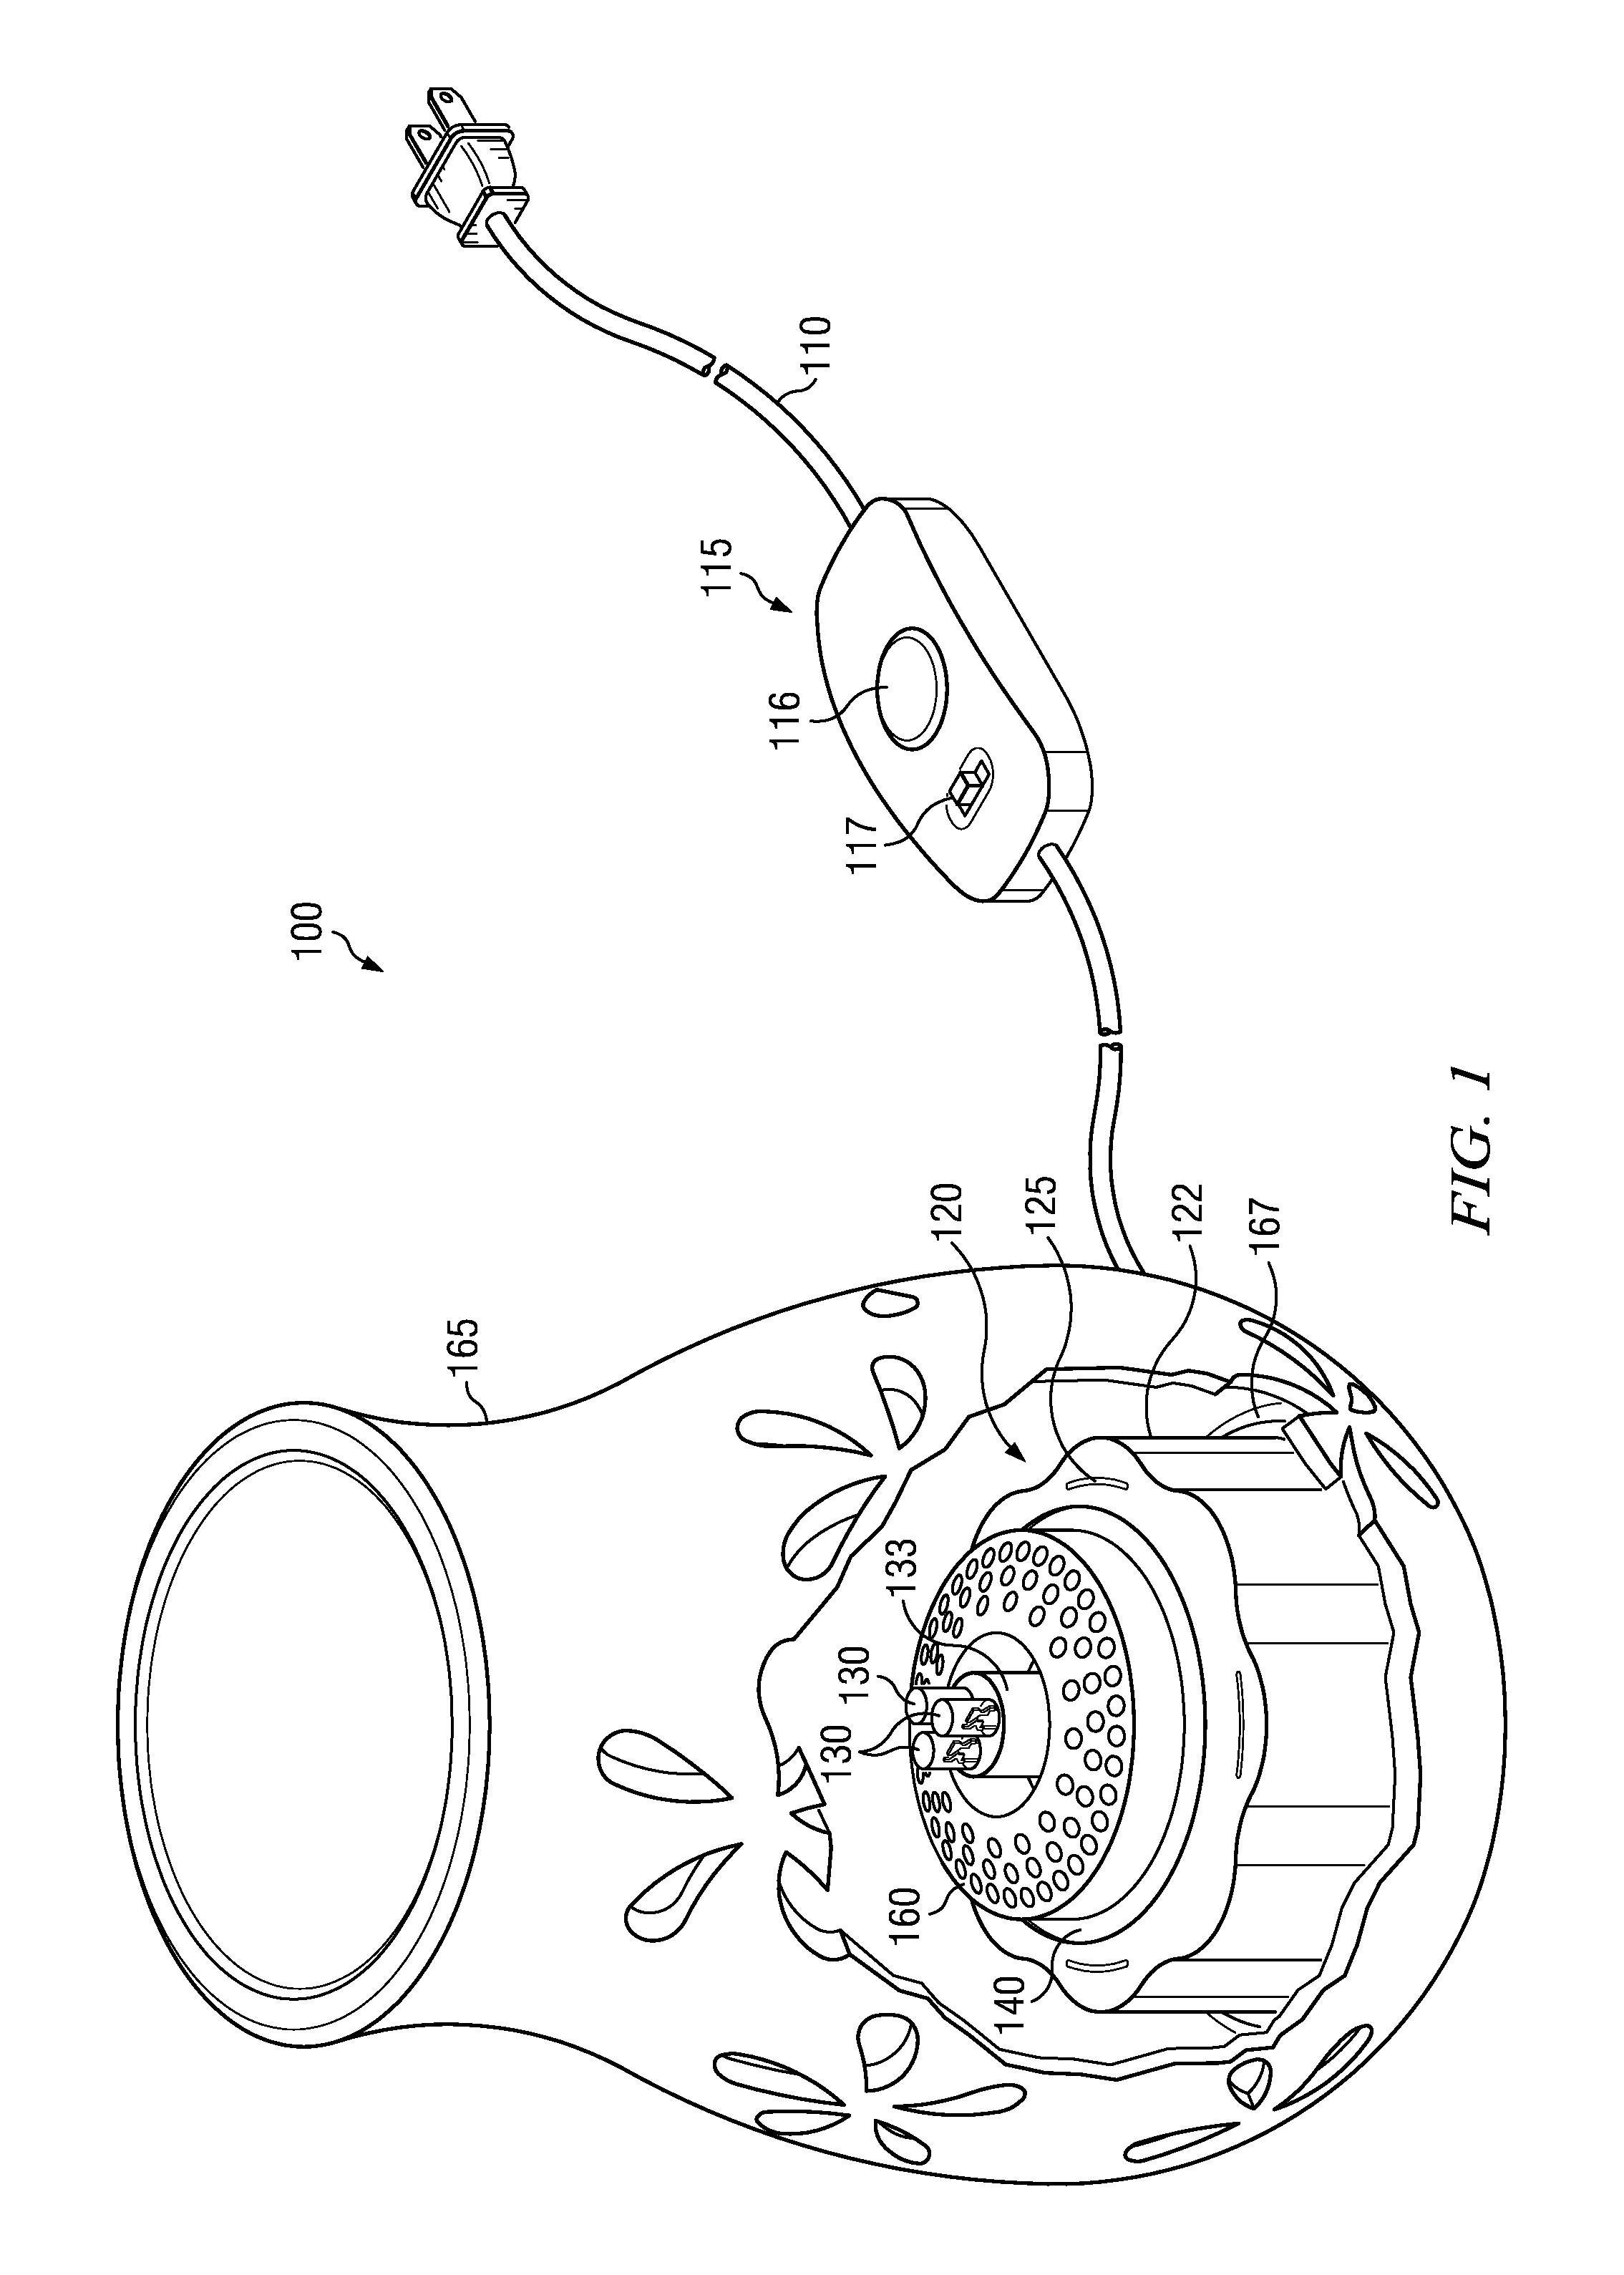 Fragrance producing lighting device